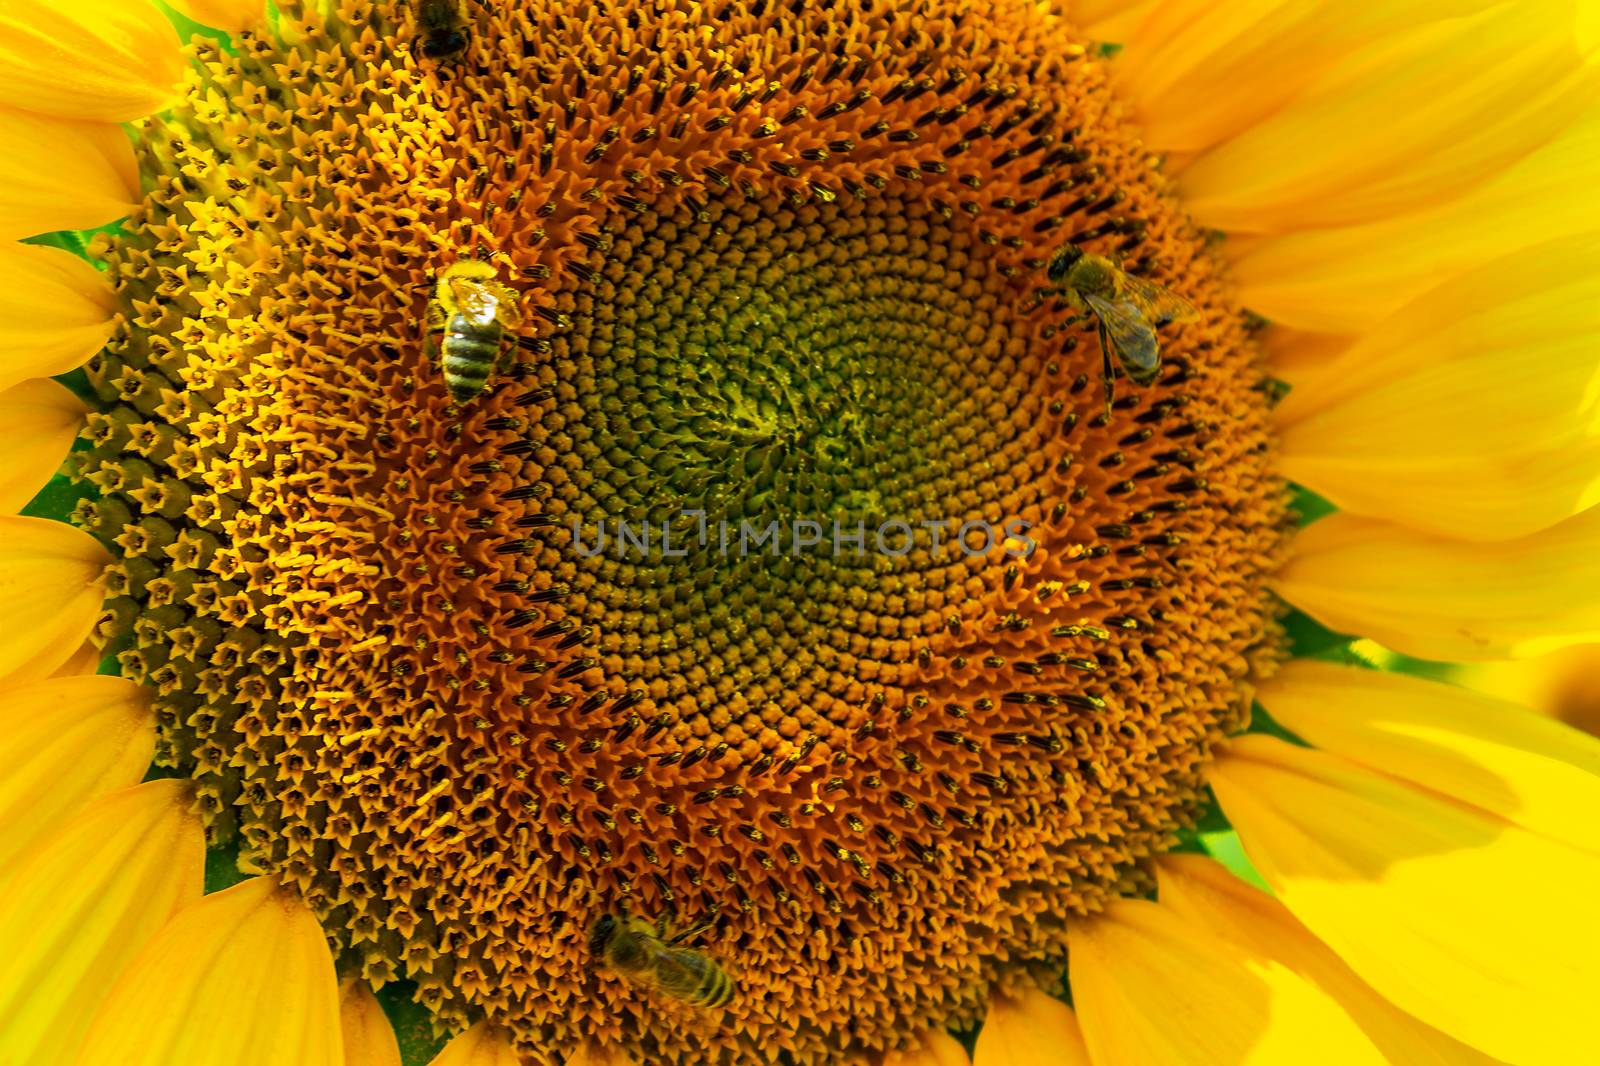 bees gathering pollen of the sunflower by Pellinni